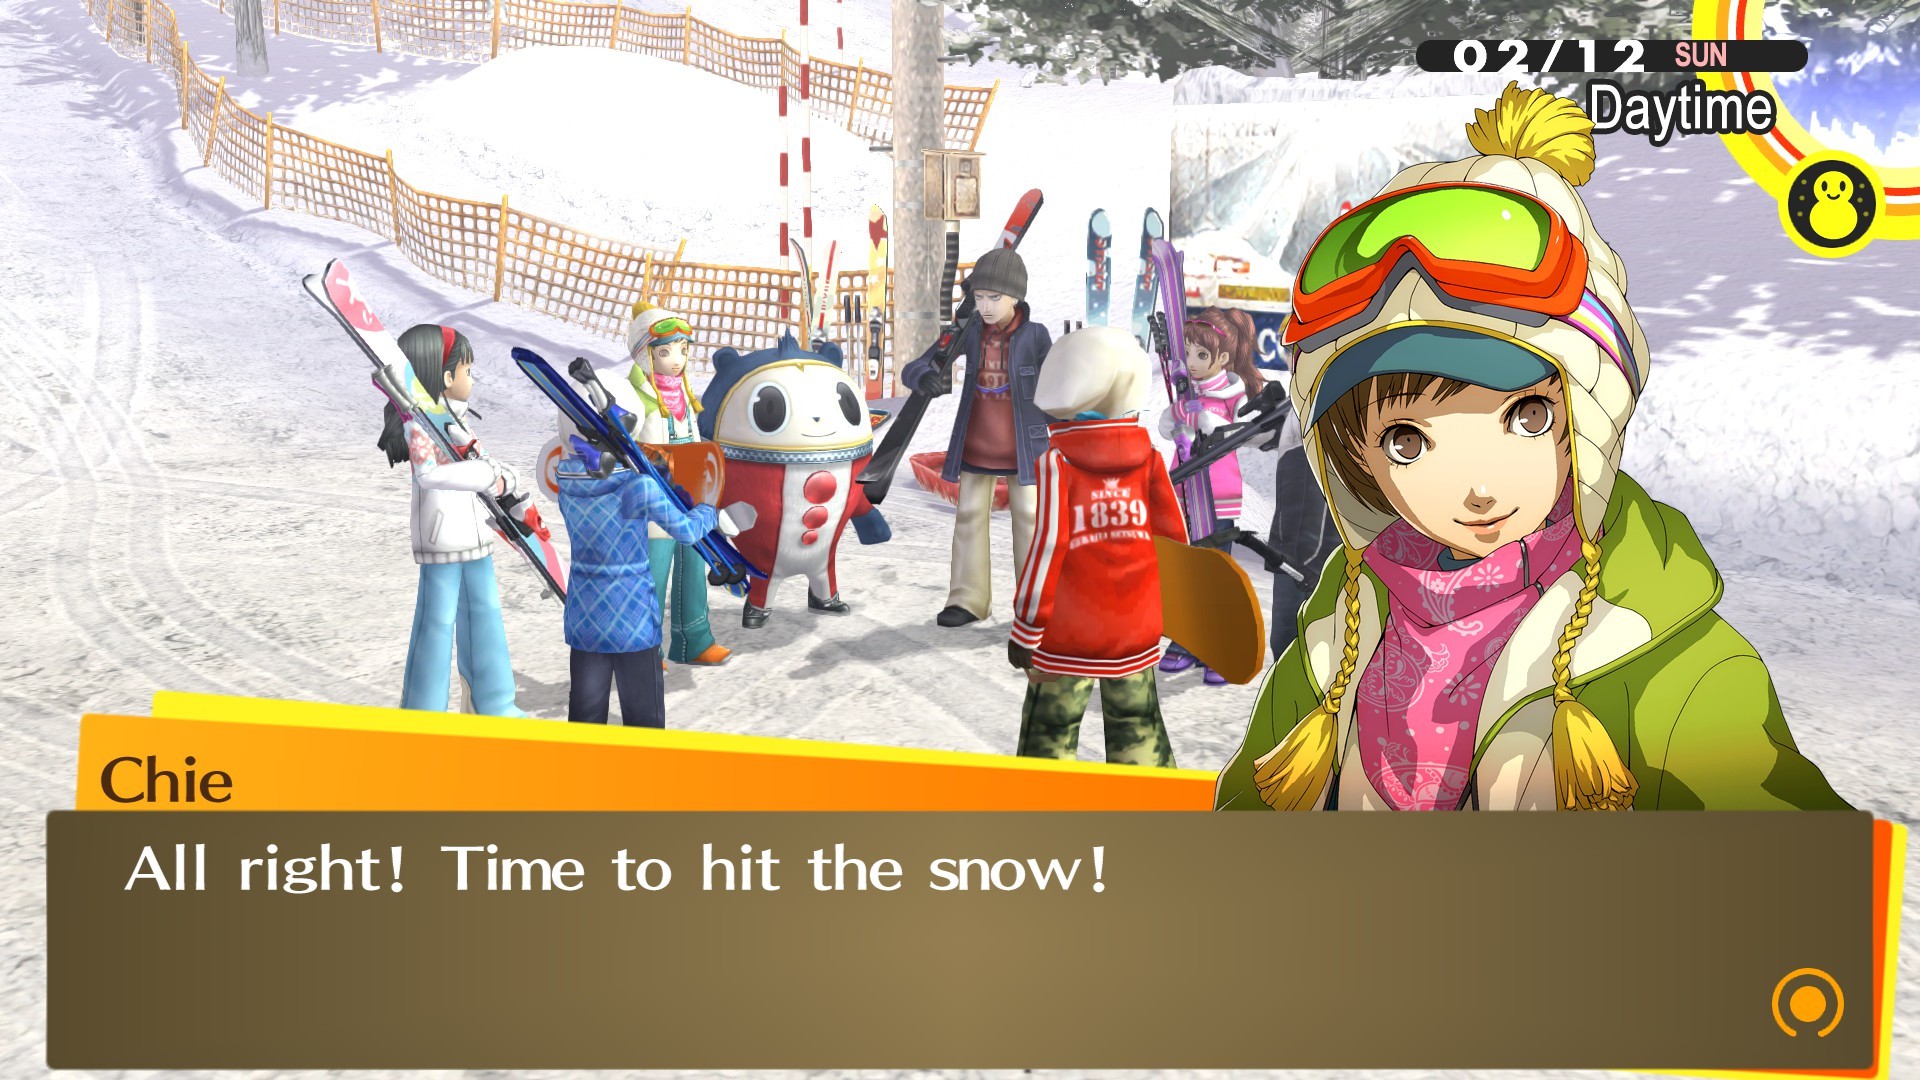 Persona 4 Golden Images 